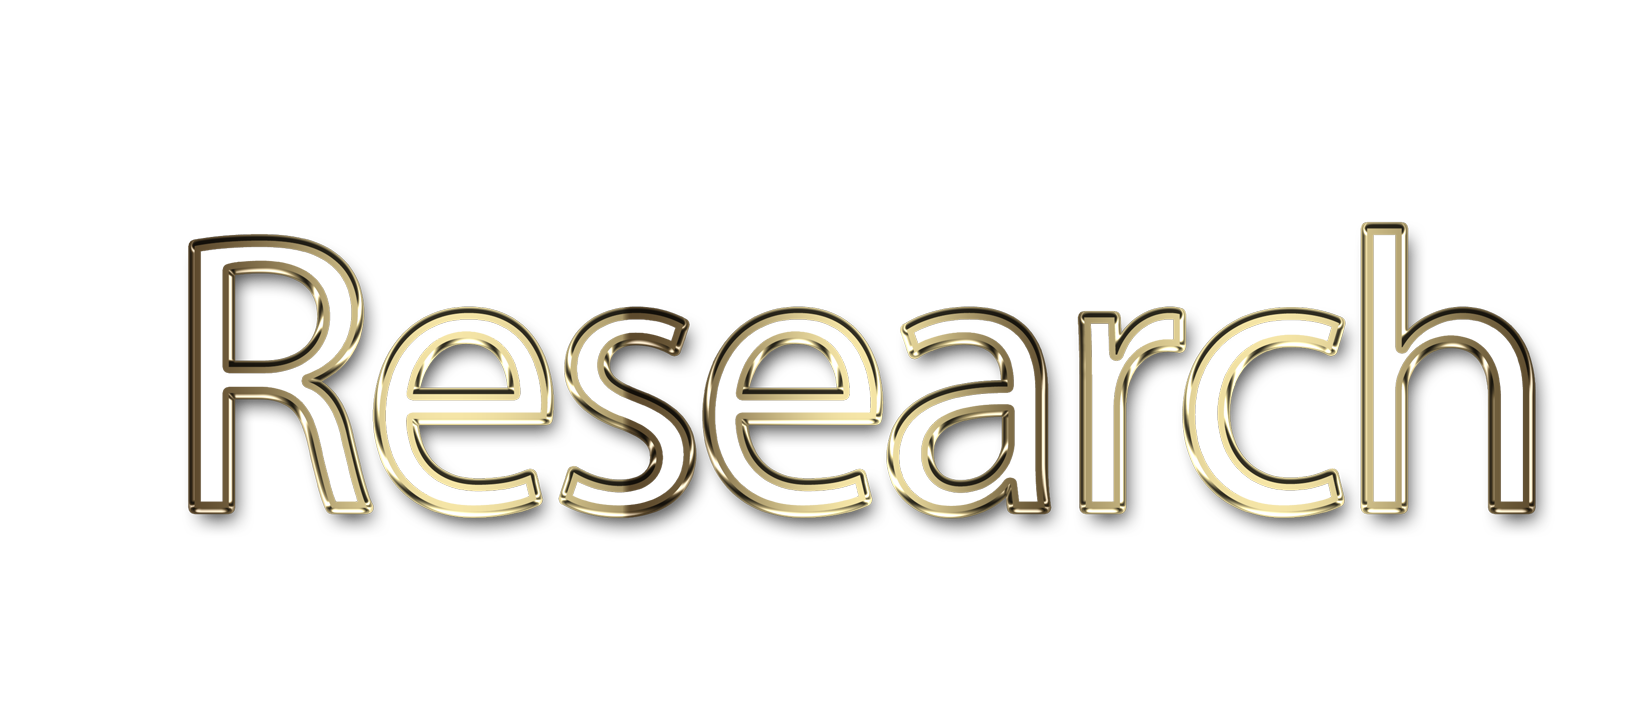 Research png, word Research png, Research word png, Research text png, Research letters png, Research word art typography PNG images, transparent png